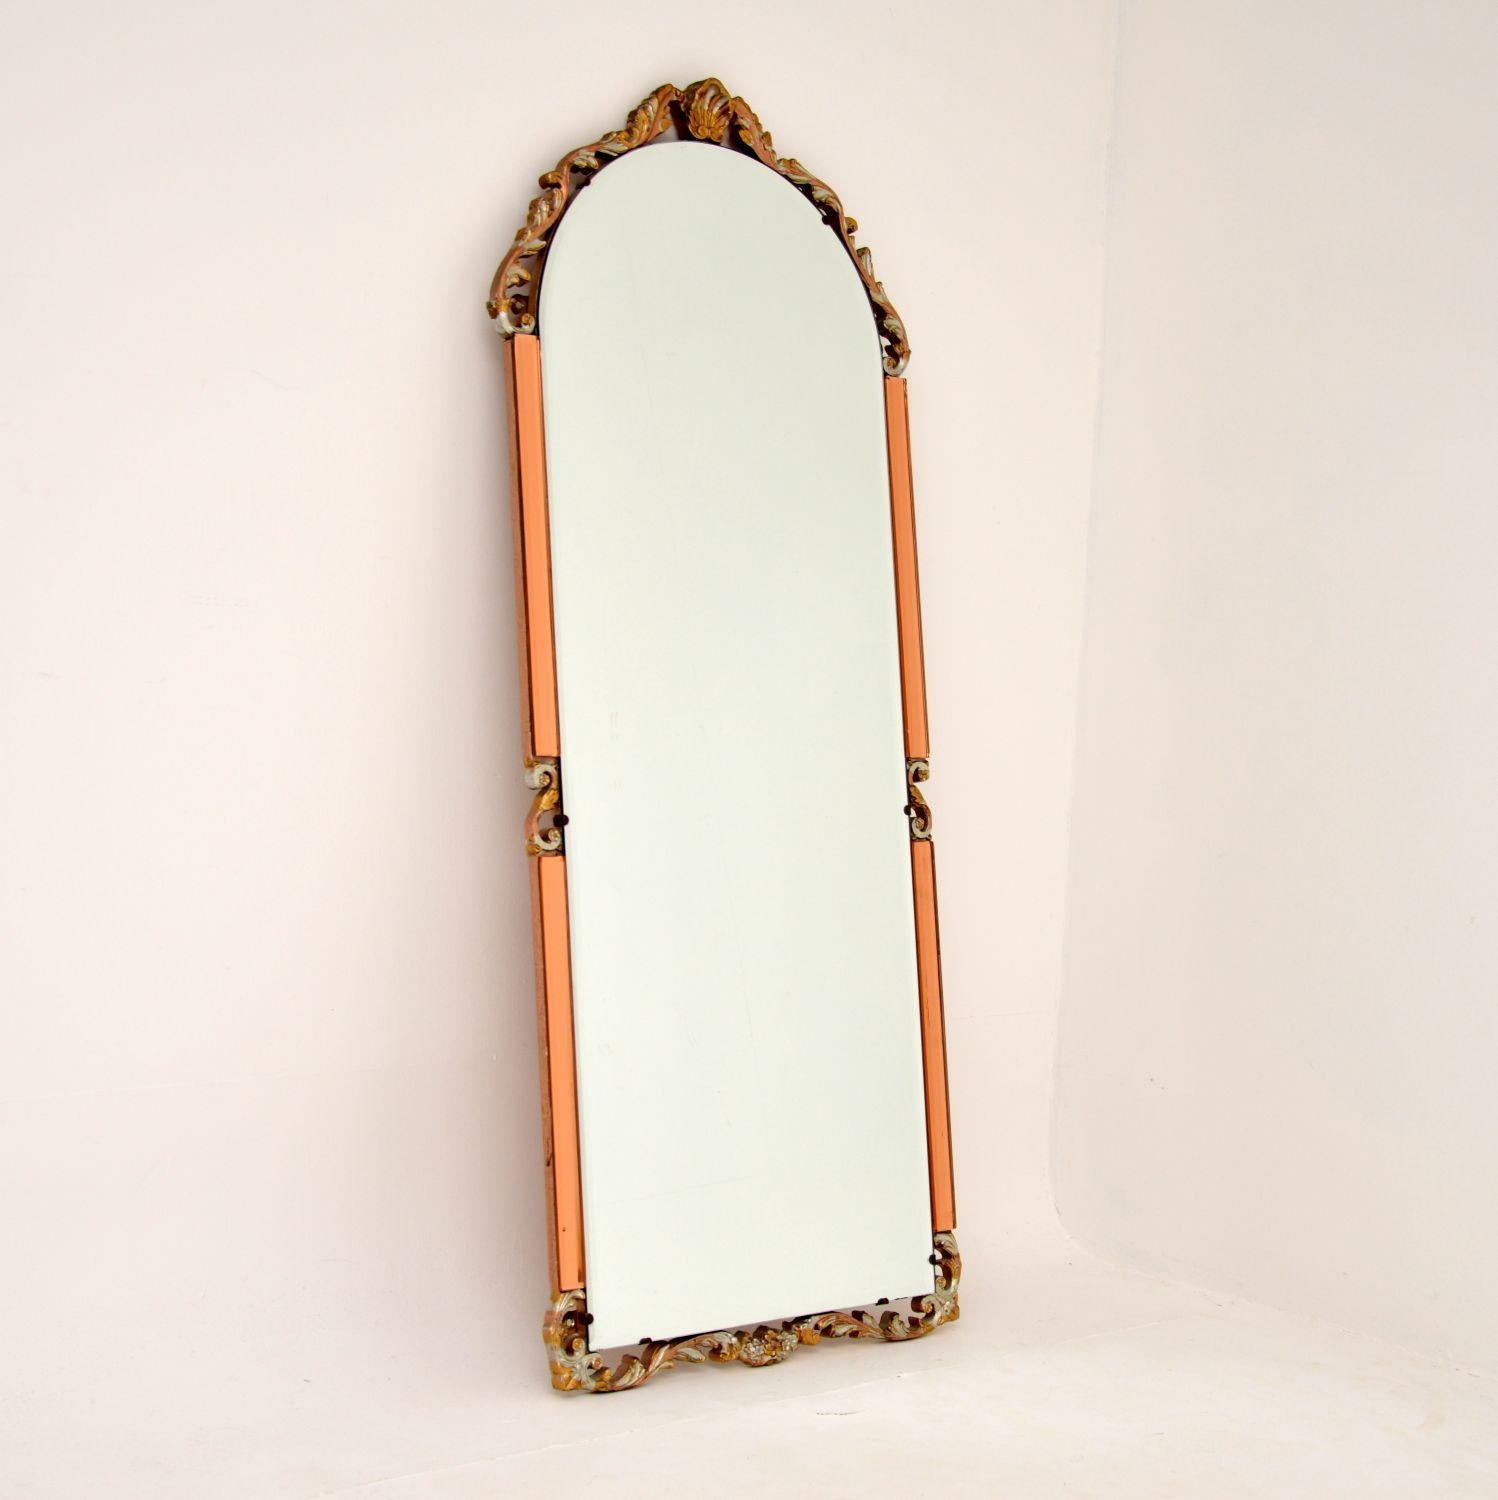 A beautiful and interesting antique Art Deco period decorative mirror made from clear and peach beveled glass. This was made in England, it dates from around the 1930’s period.

It is from the Art Deco period and is an interesting mix of styles. The